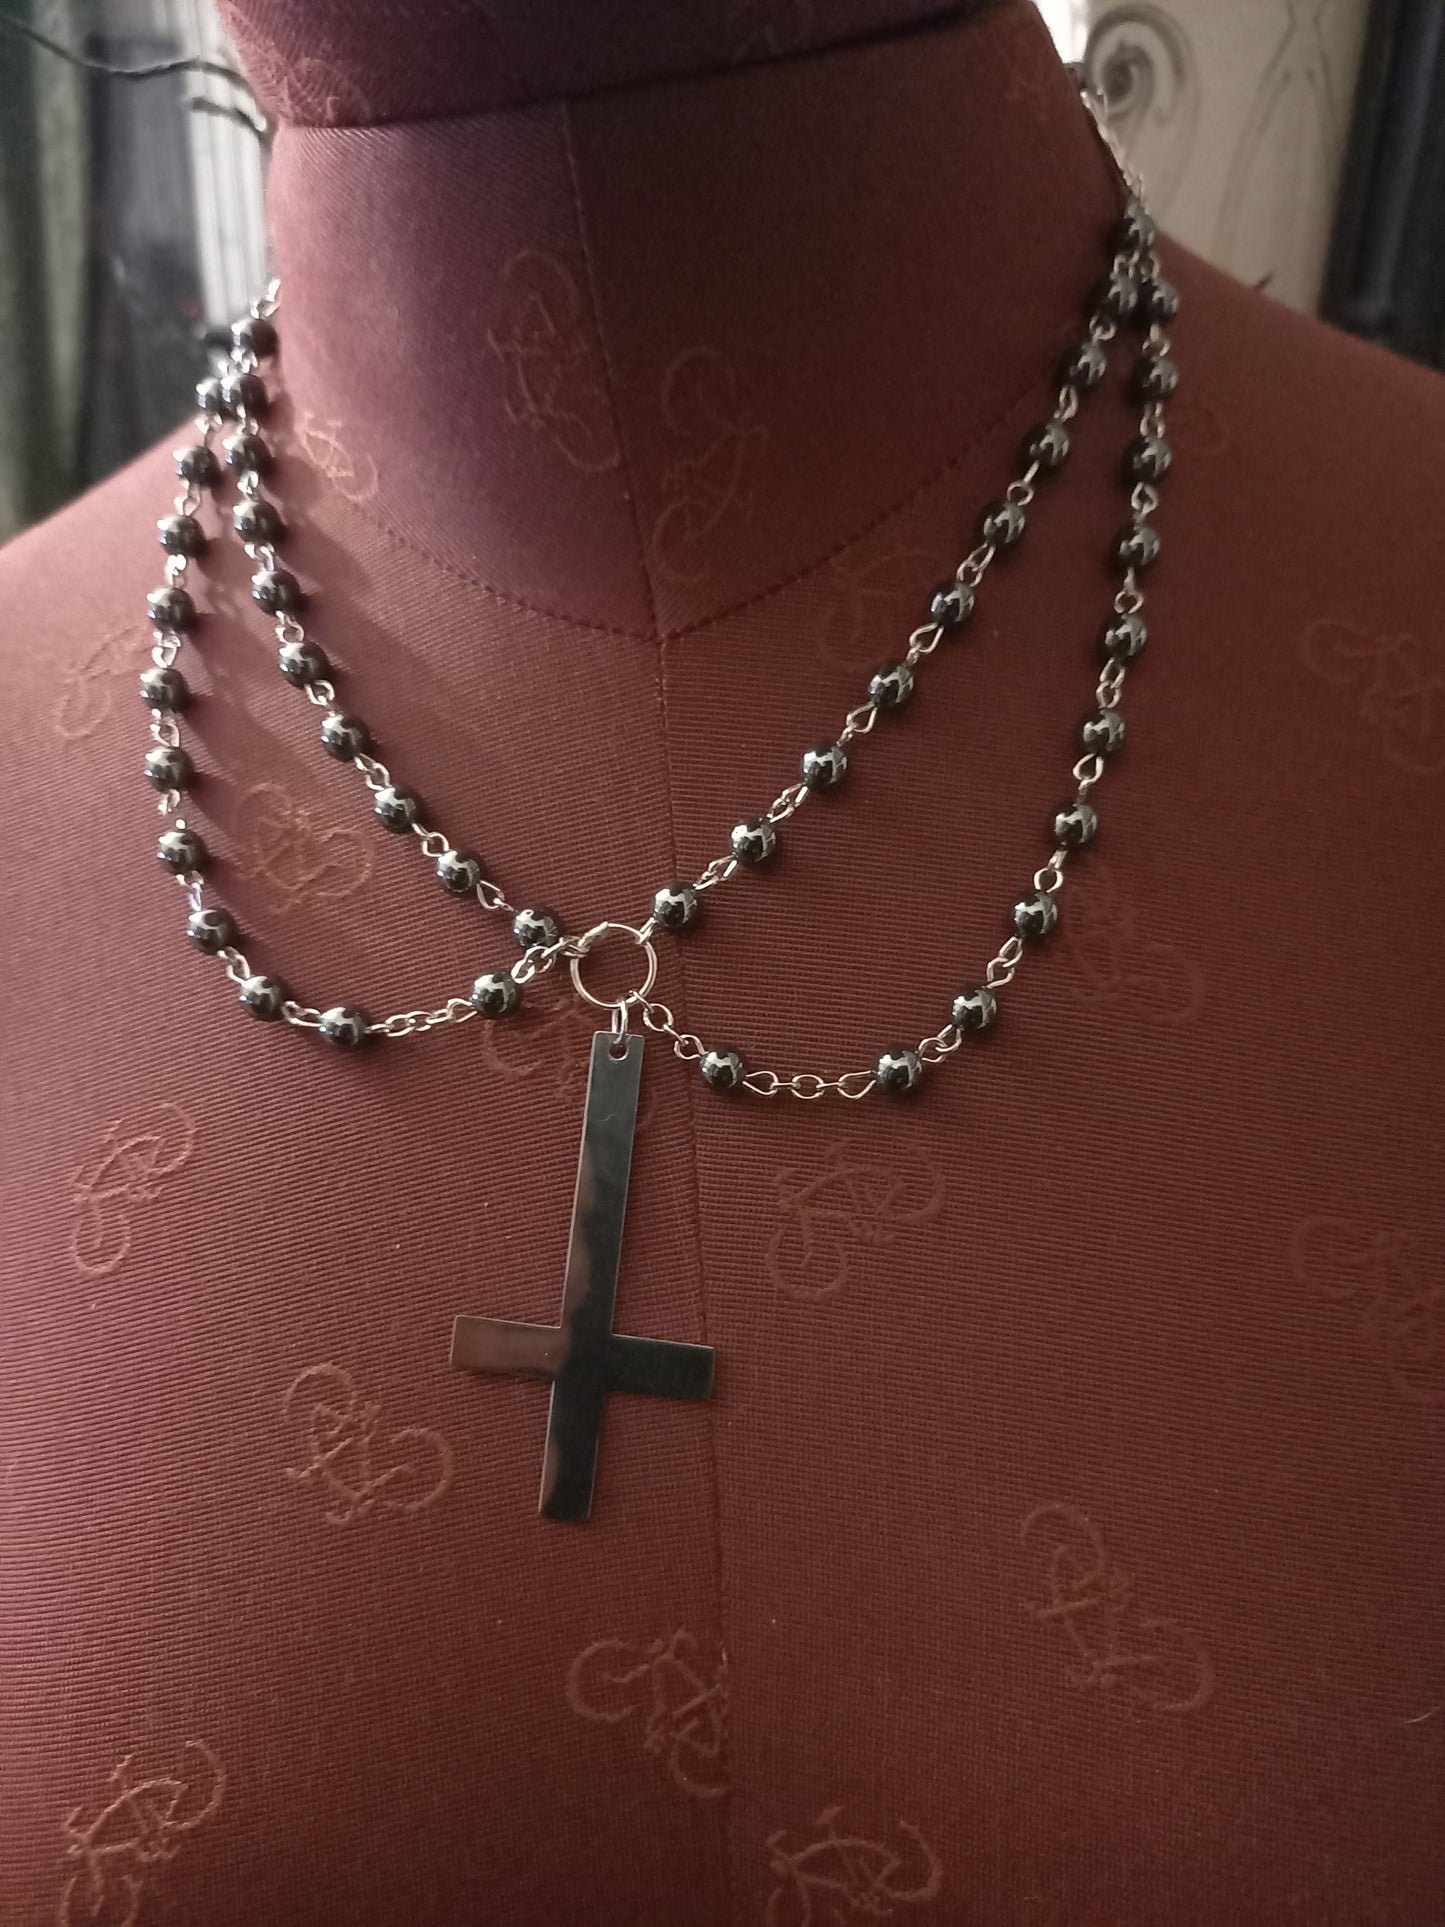 witch witchcraft Satanic Occult "Stainless steel Inverted cross with inverted pentagrams " double layer rosary